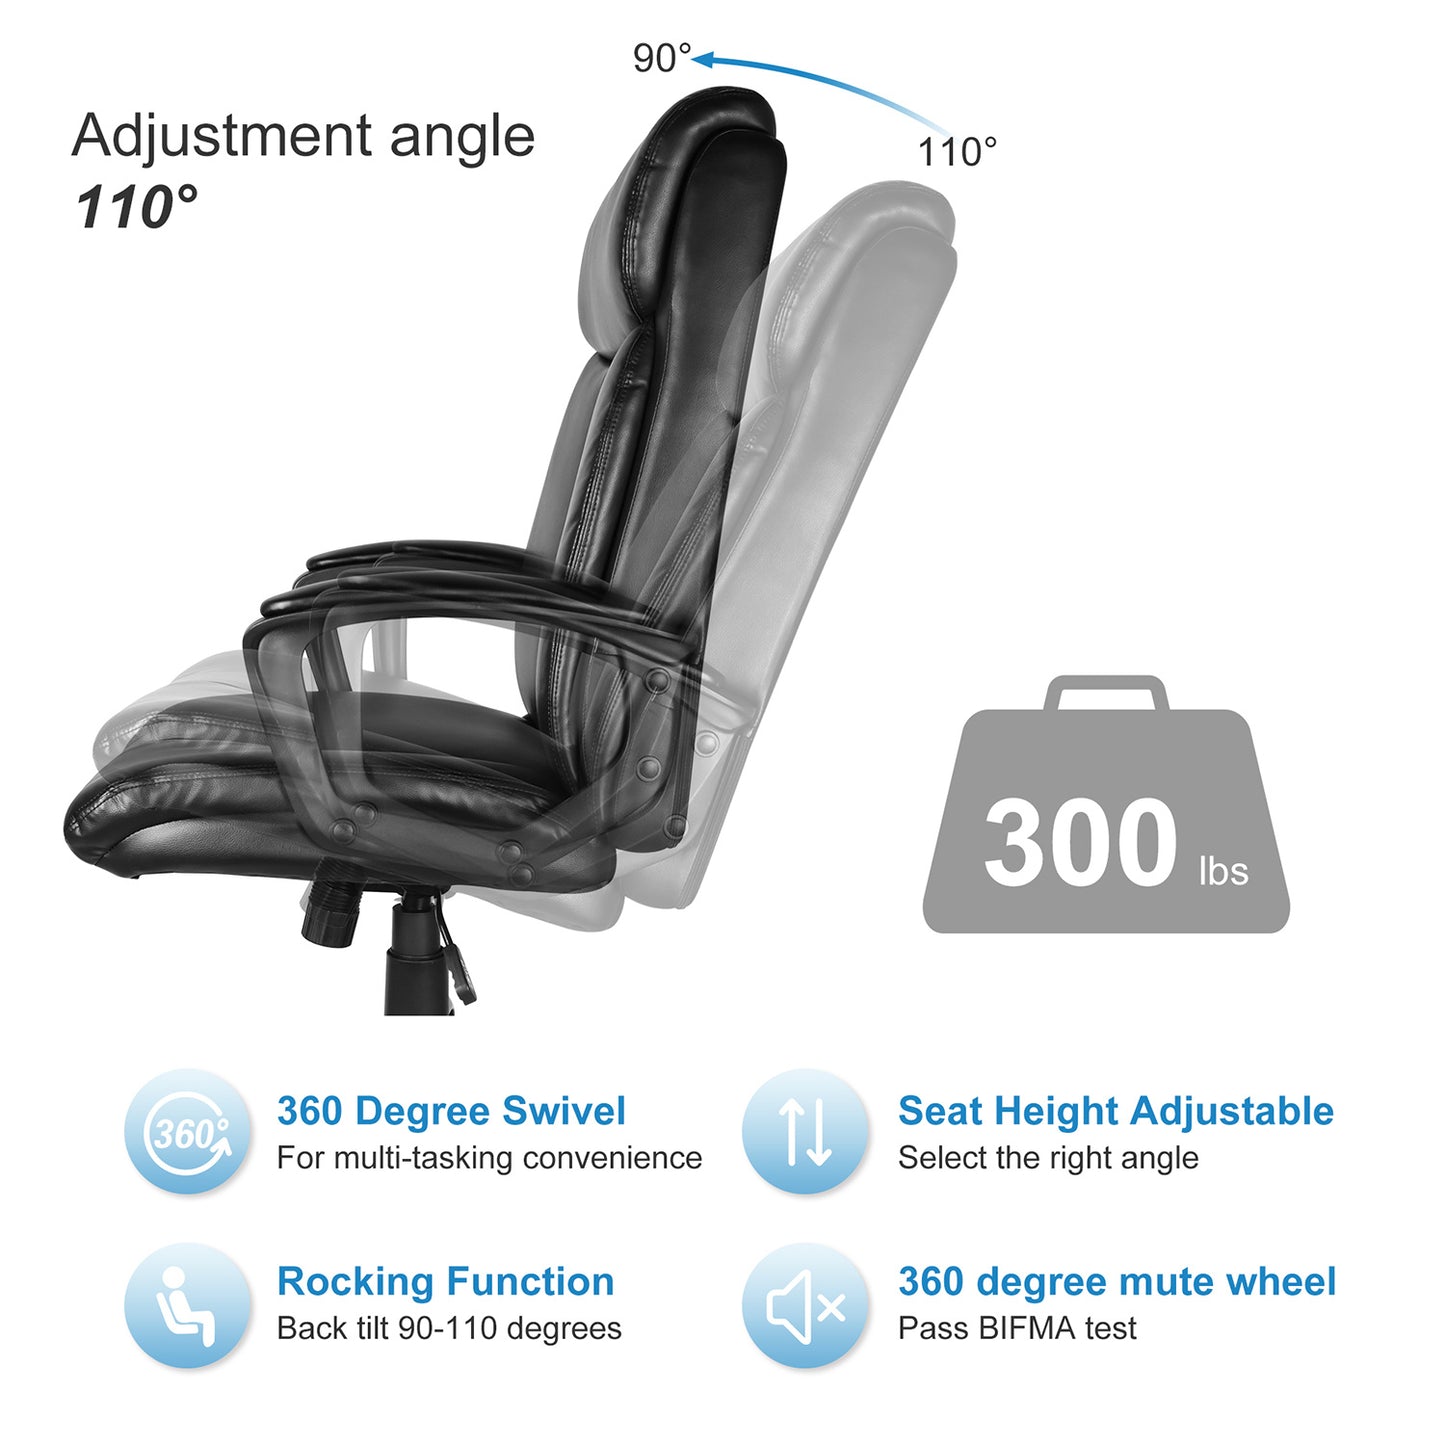 Padded Mid-Back Office Computer Desk Chair with Armrest